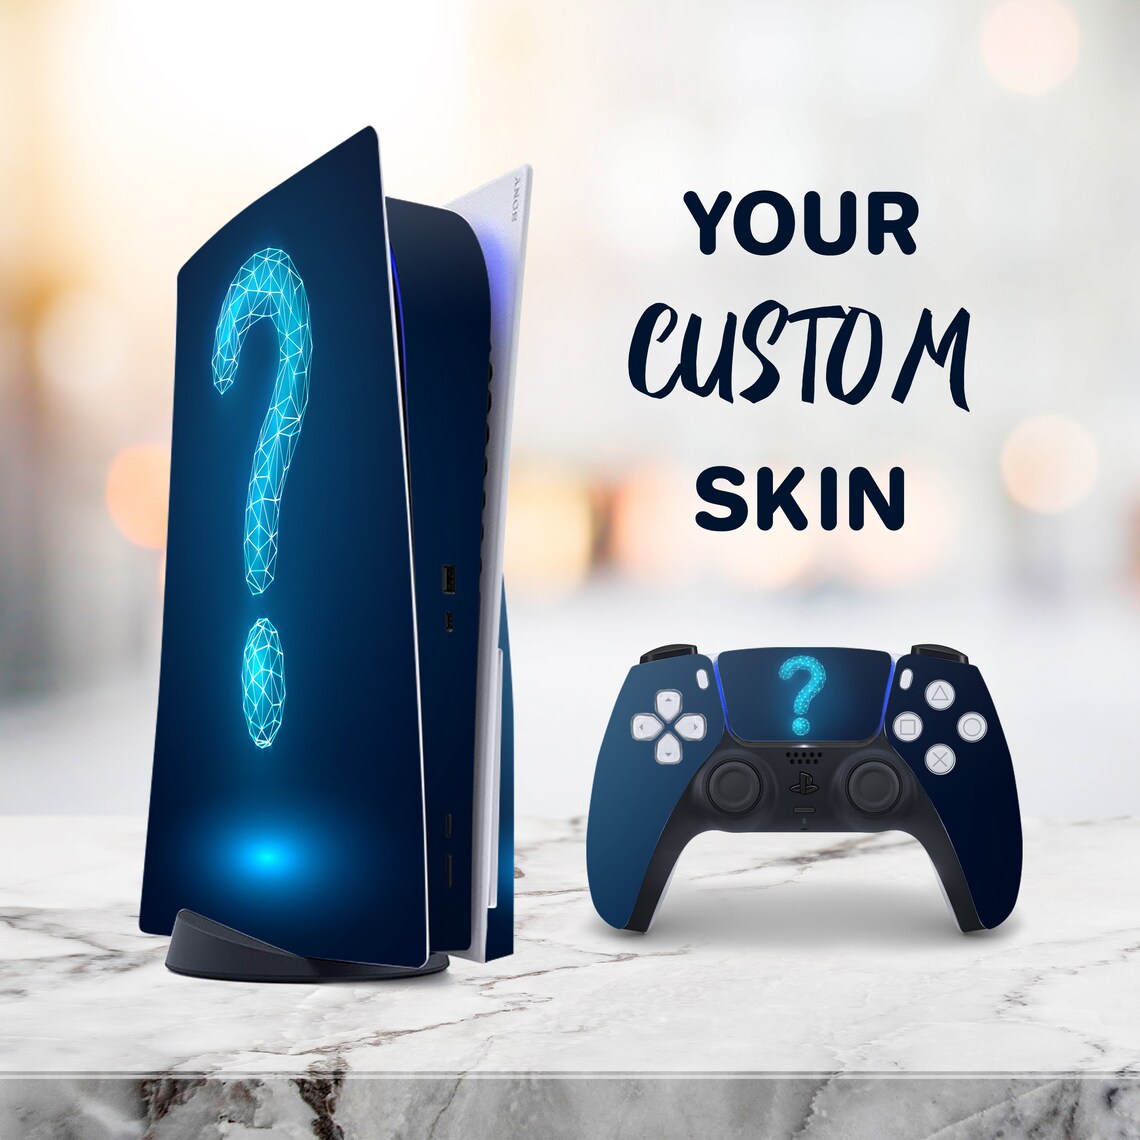 Enhance your PS5 with a personalized protector skin from Best Skins – style and protection in one sleek design